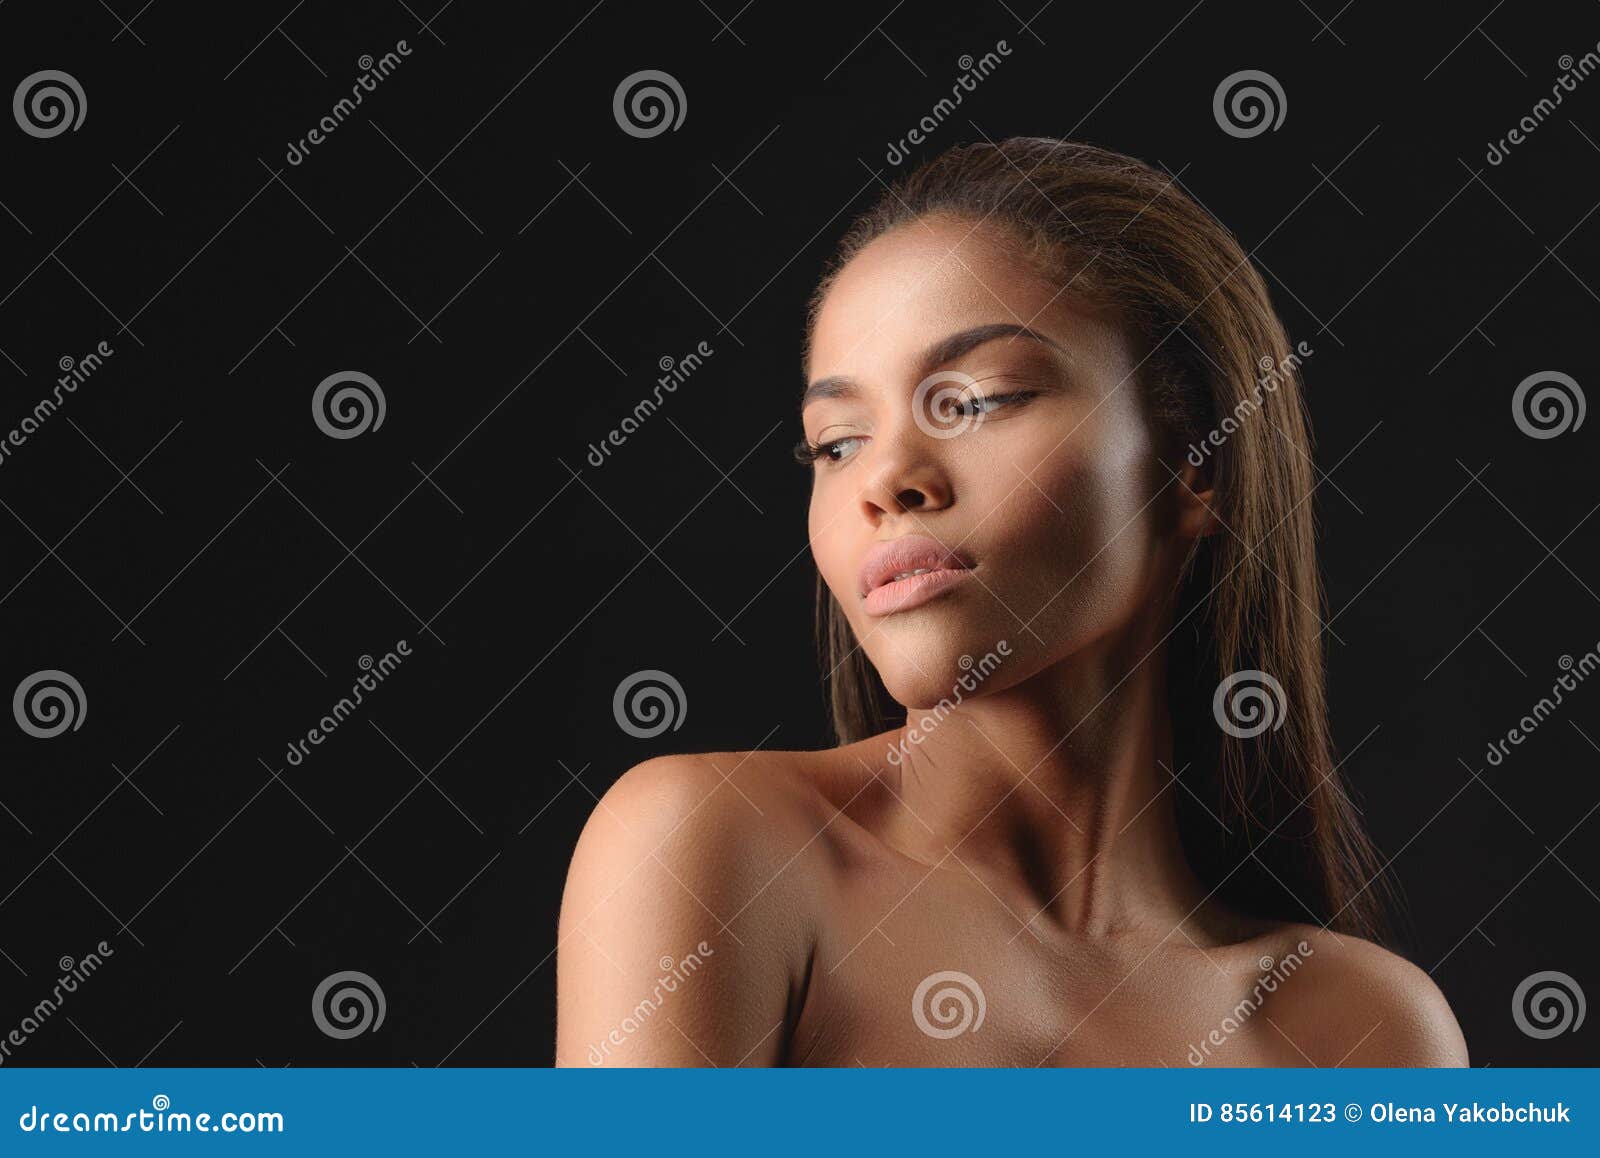 Mulatto black nude girl Voluptuous Young Naked Mulatto Girl Photos Free Royalty Free Stock Photos From Dreamstime